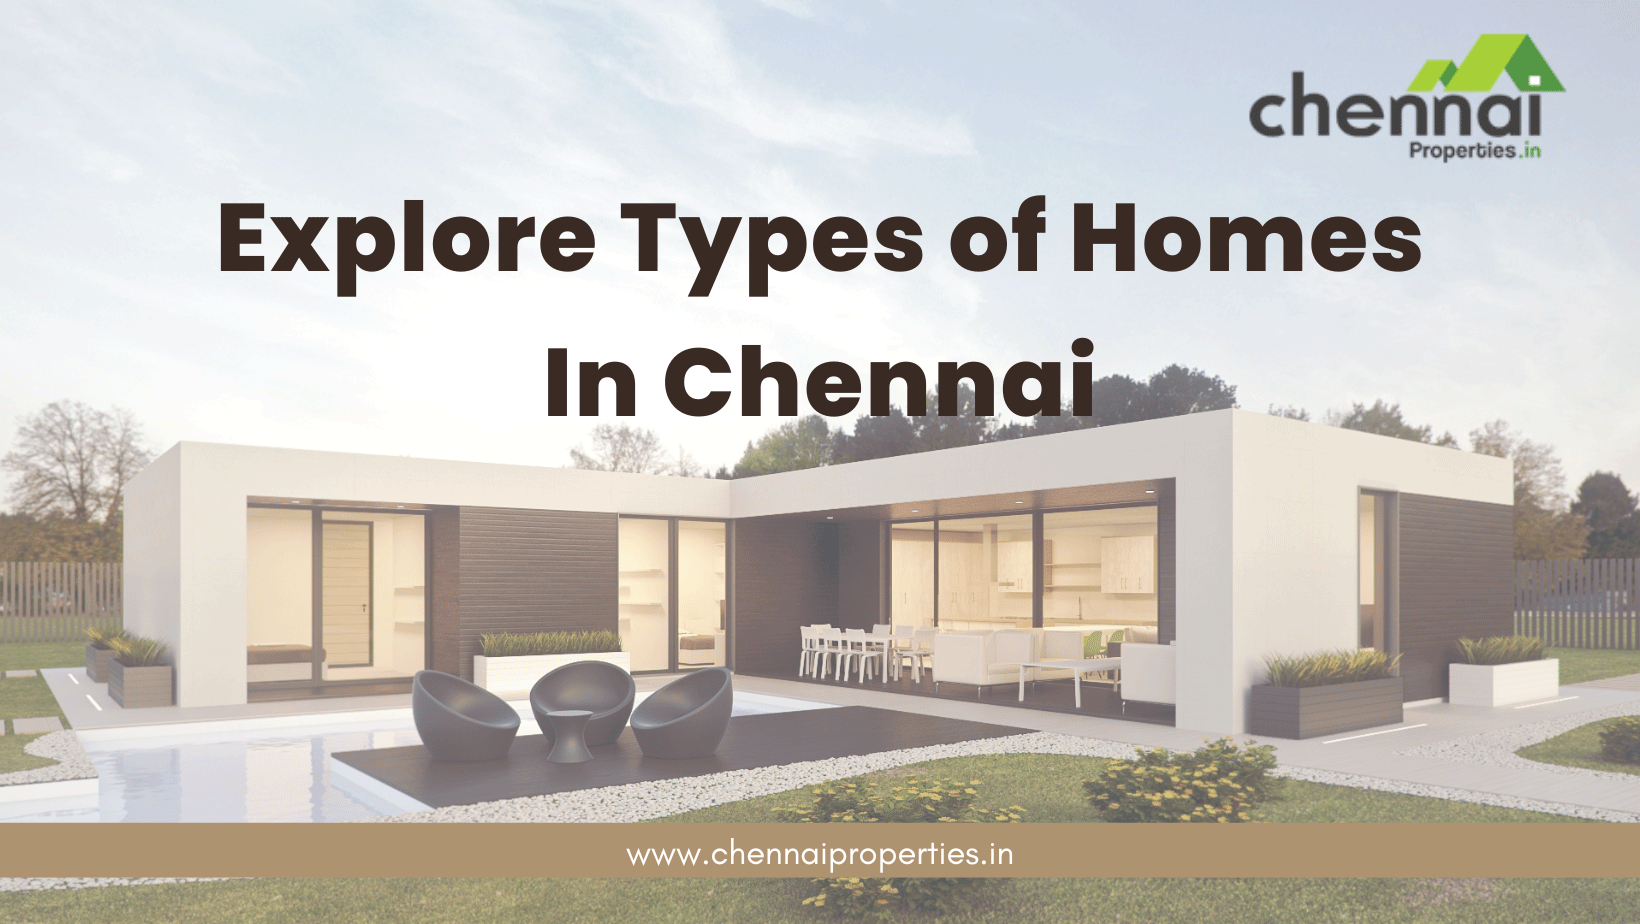 Explore Types of Homes in Chennai